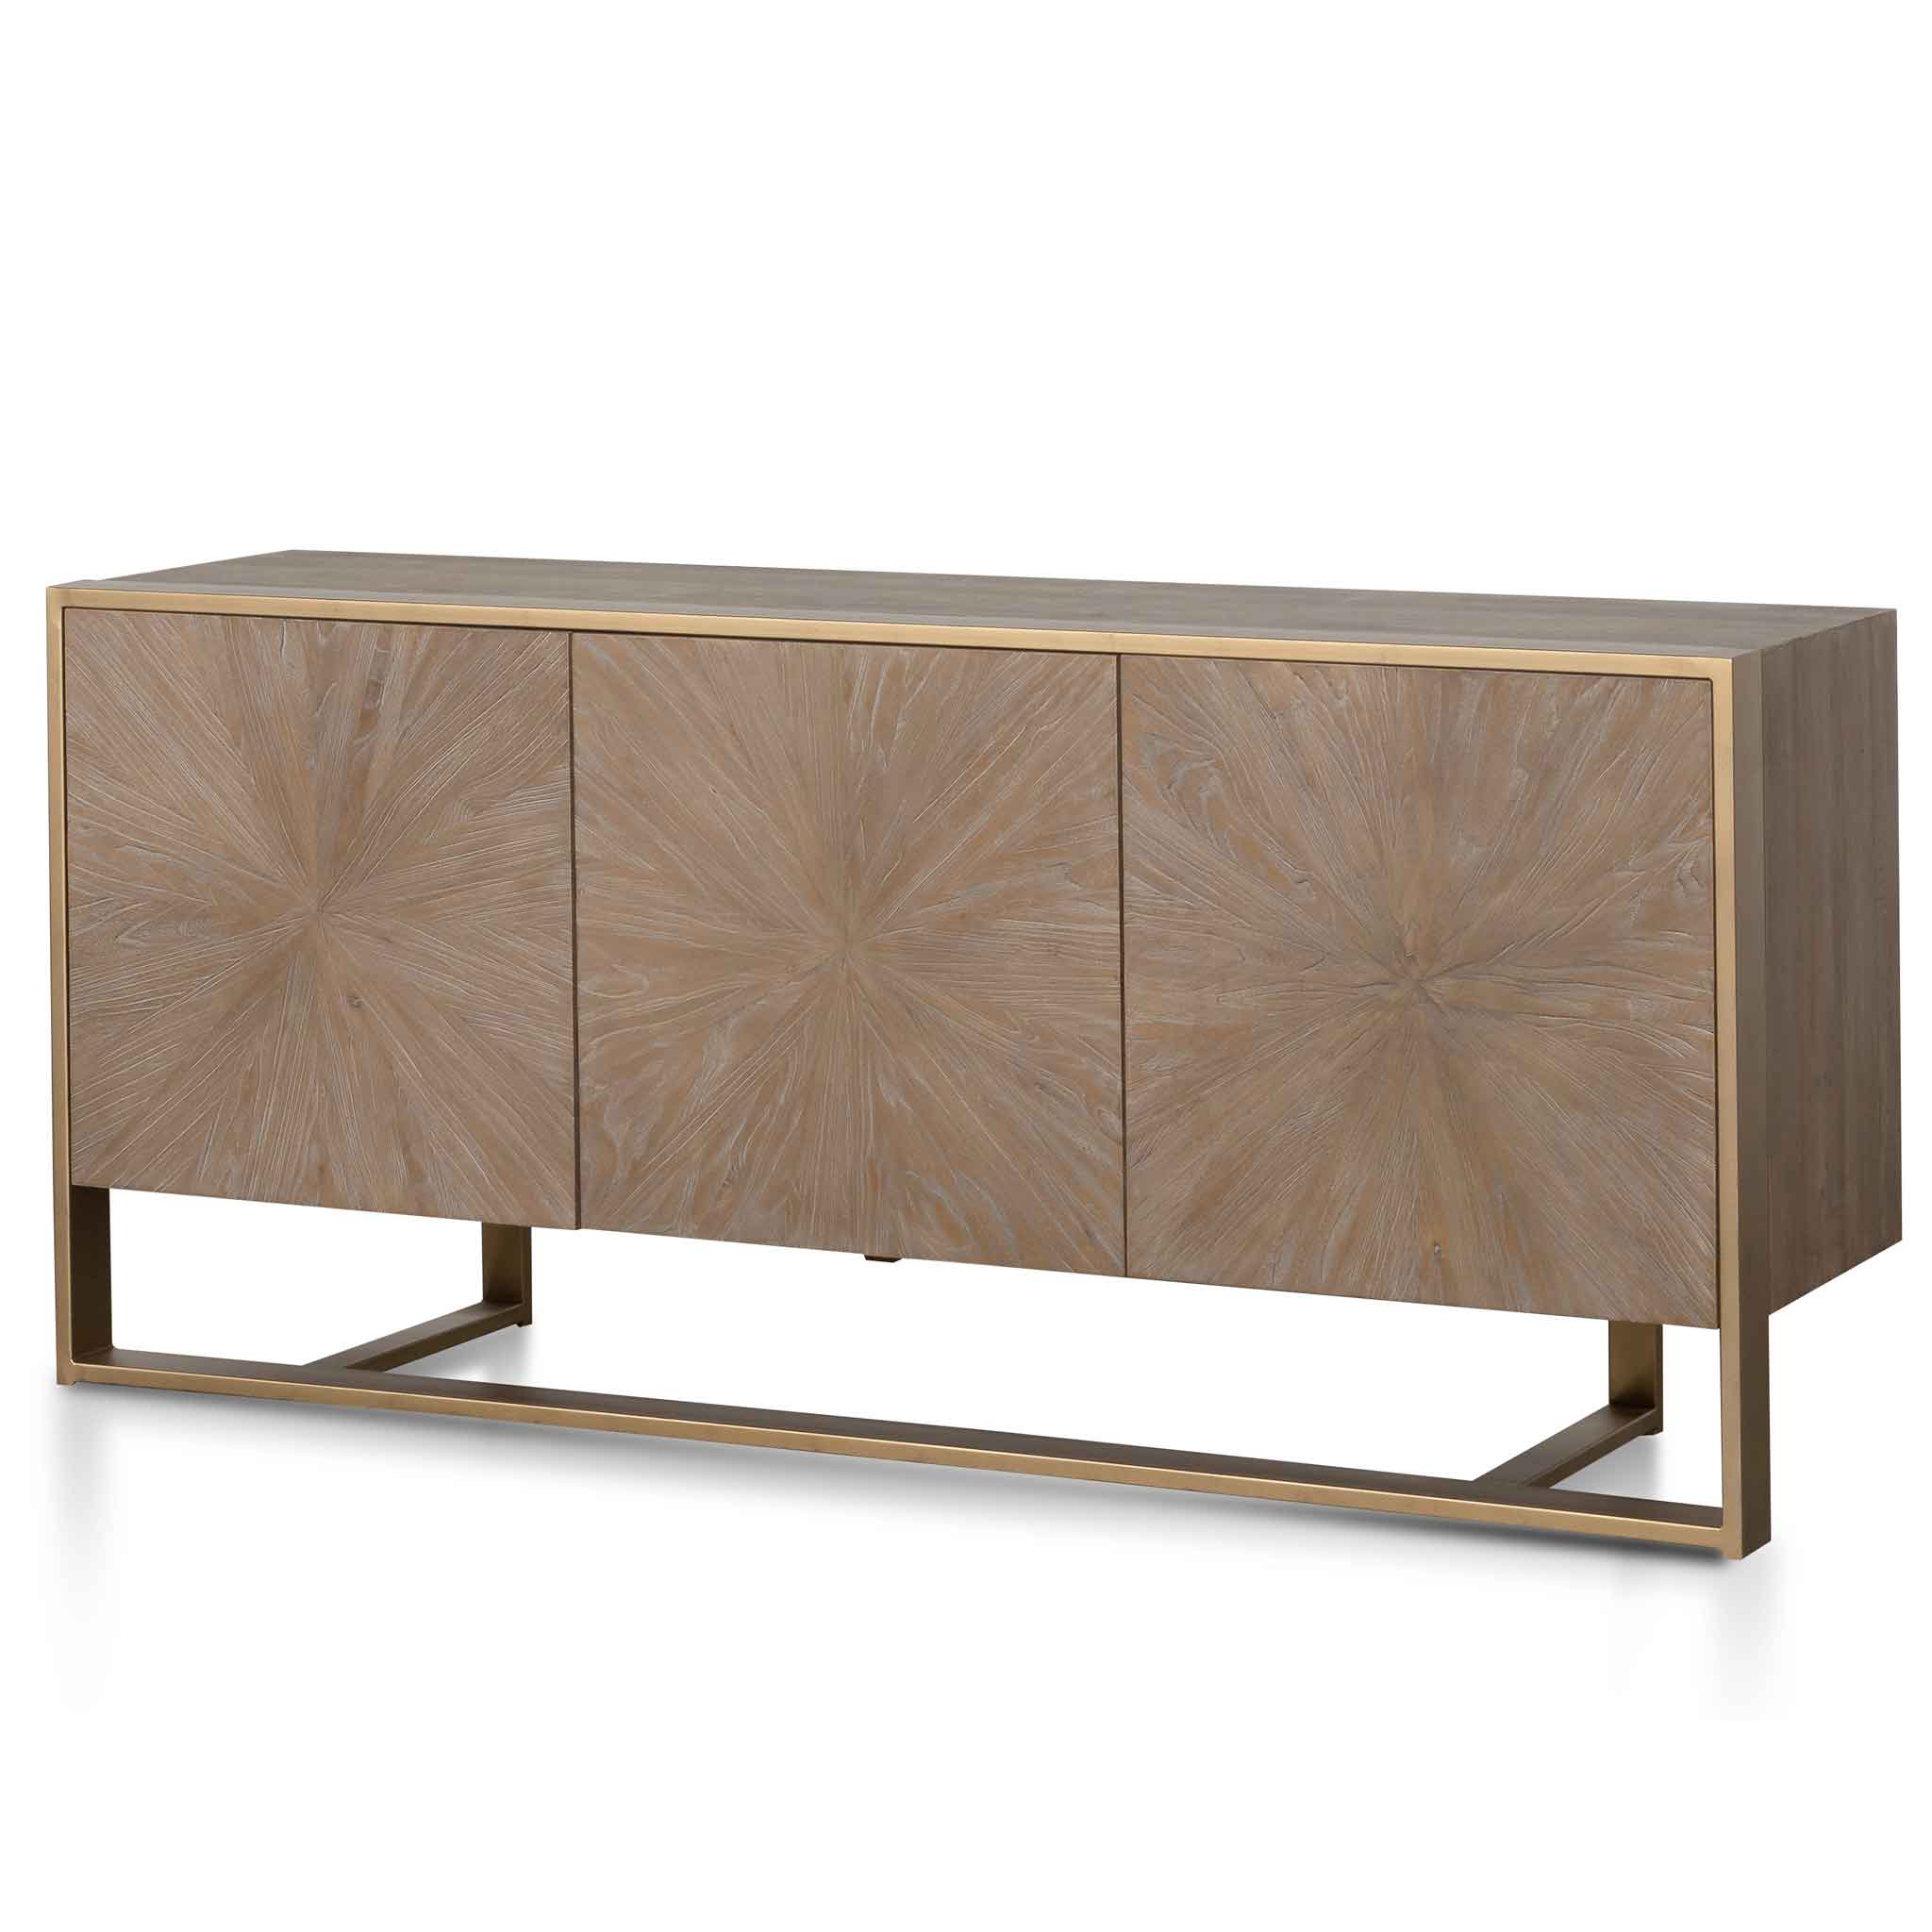 Kinsley Elm Wood Side Board and Buffet - Natural